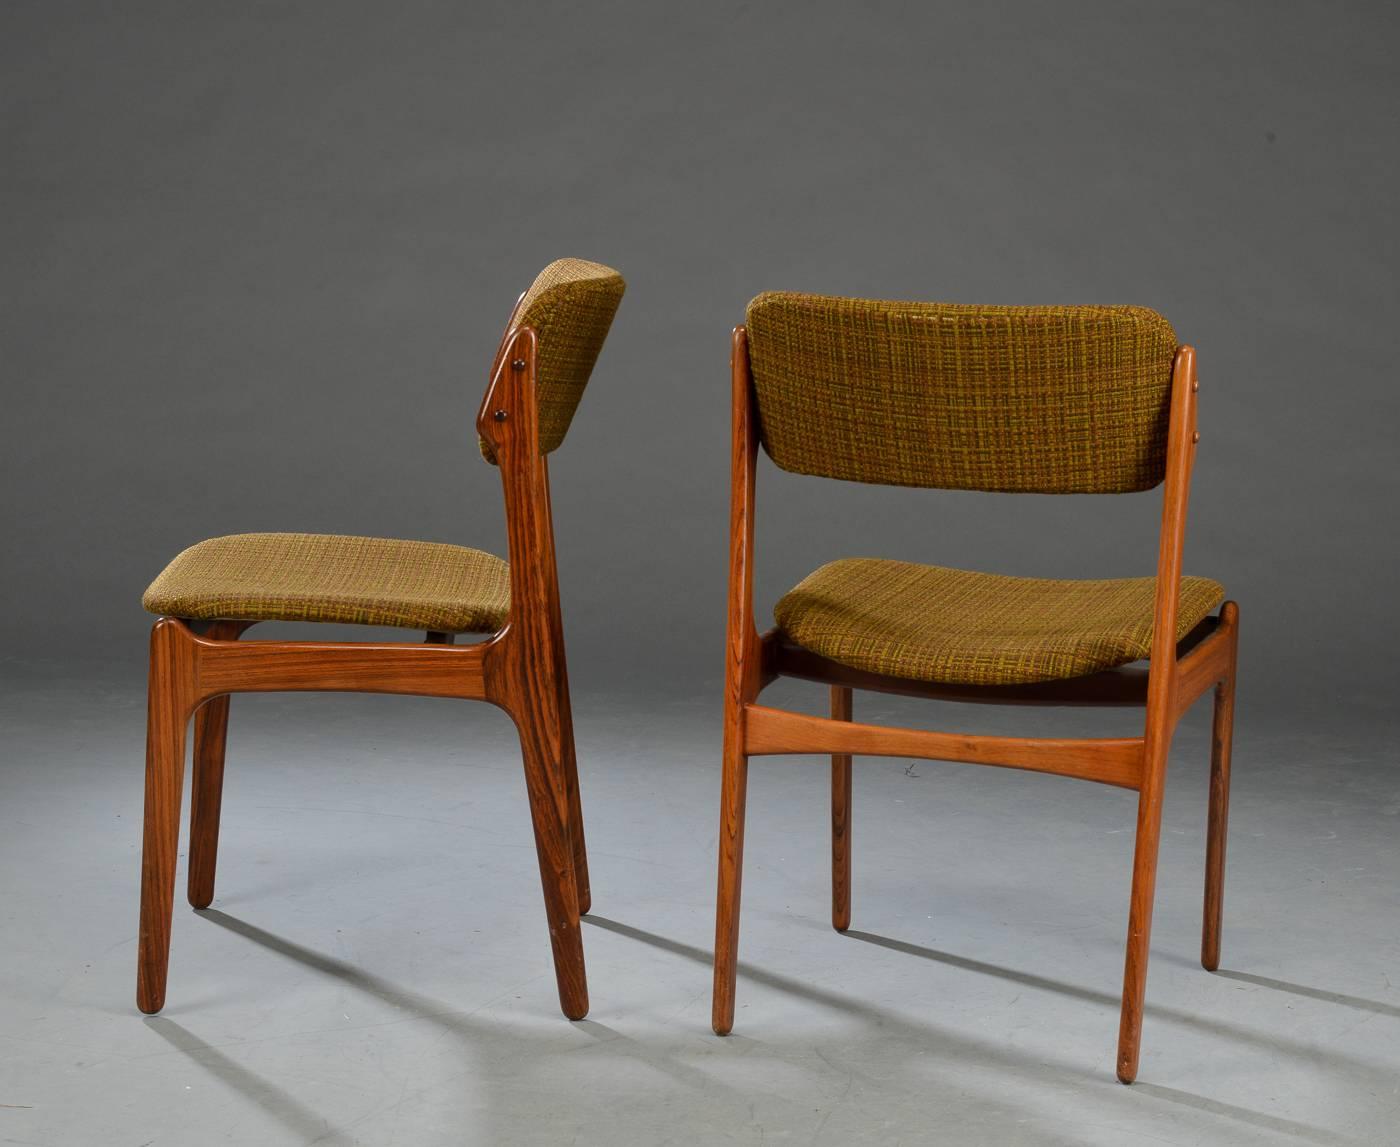 Erik Buck. Four chairs with hardwood frame, seats and top rails upholstered in wool. Produced by Oddense Maskinsnedkeri A/S, model OD 49.
Perfect original condition but a new upholstery is on request possible.
Measures: H. 79 SH. 45 cm.